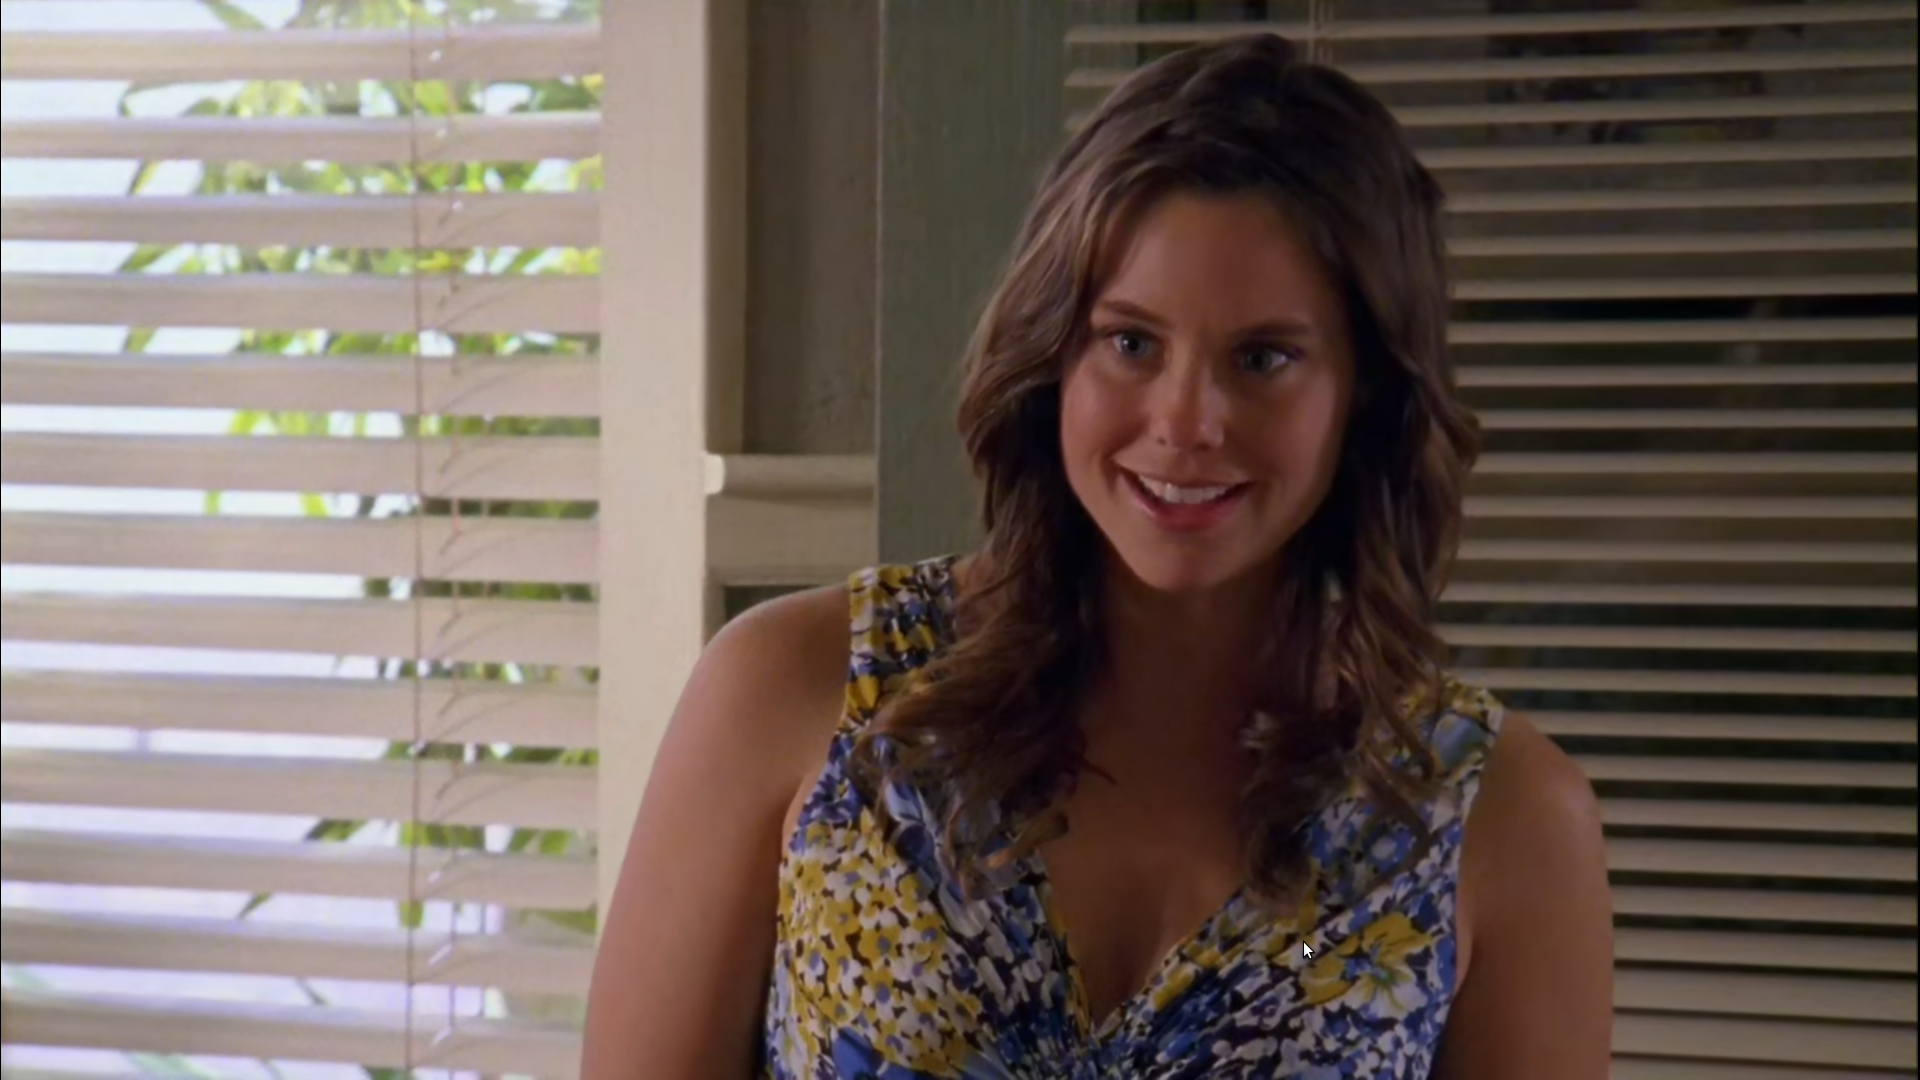 HOT GIRL from past on PSYCH.png.